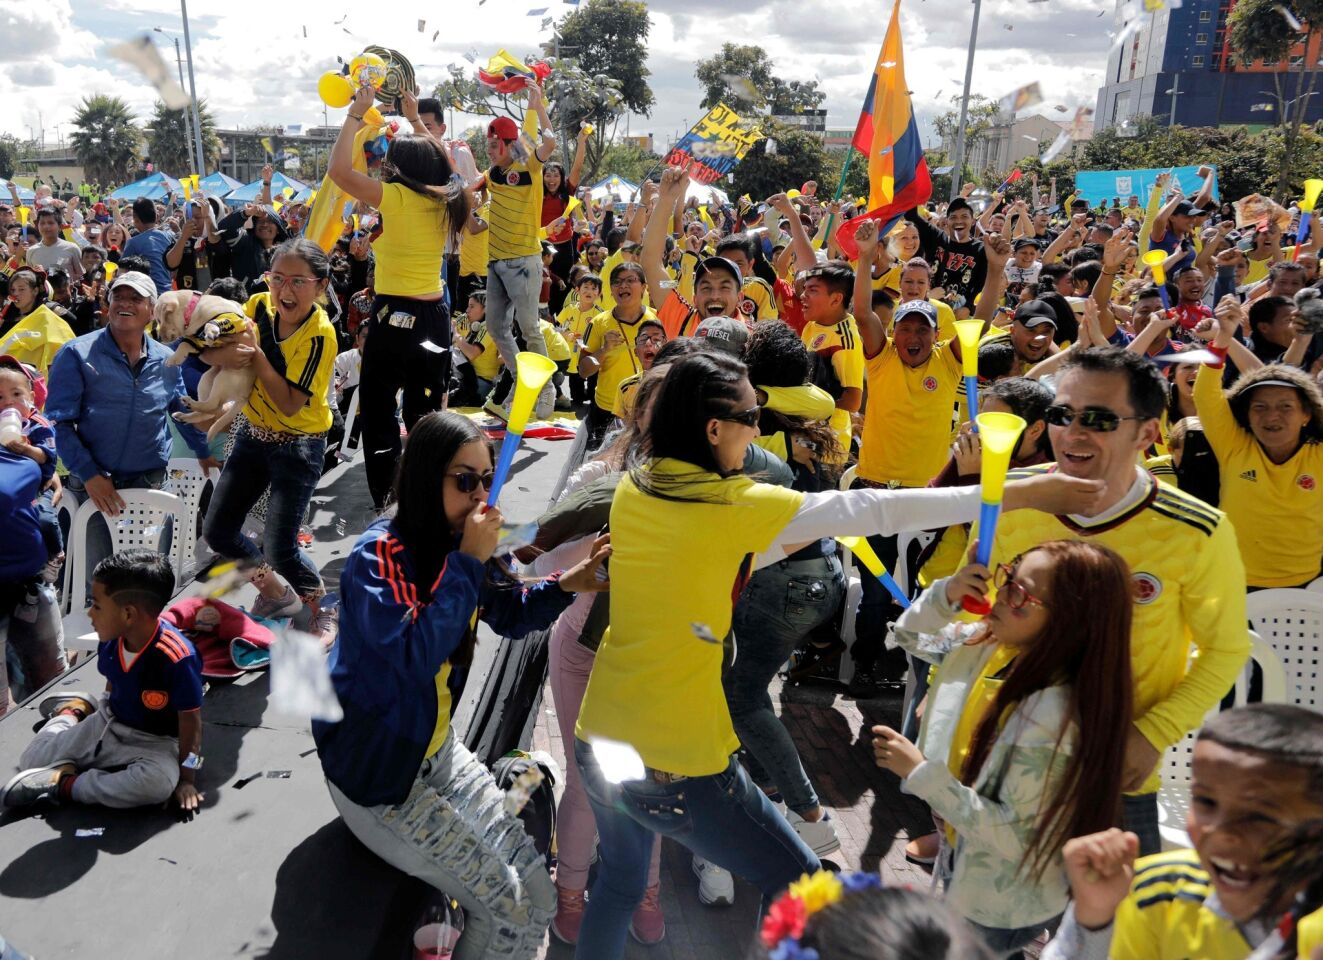 COLOMBIA-FBL-WC-2018-COL-POL-SUPPORTERS